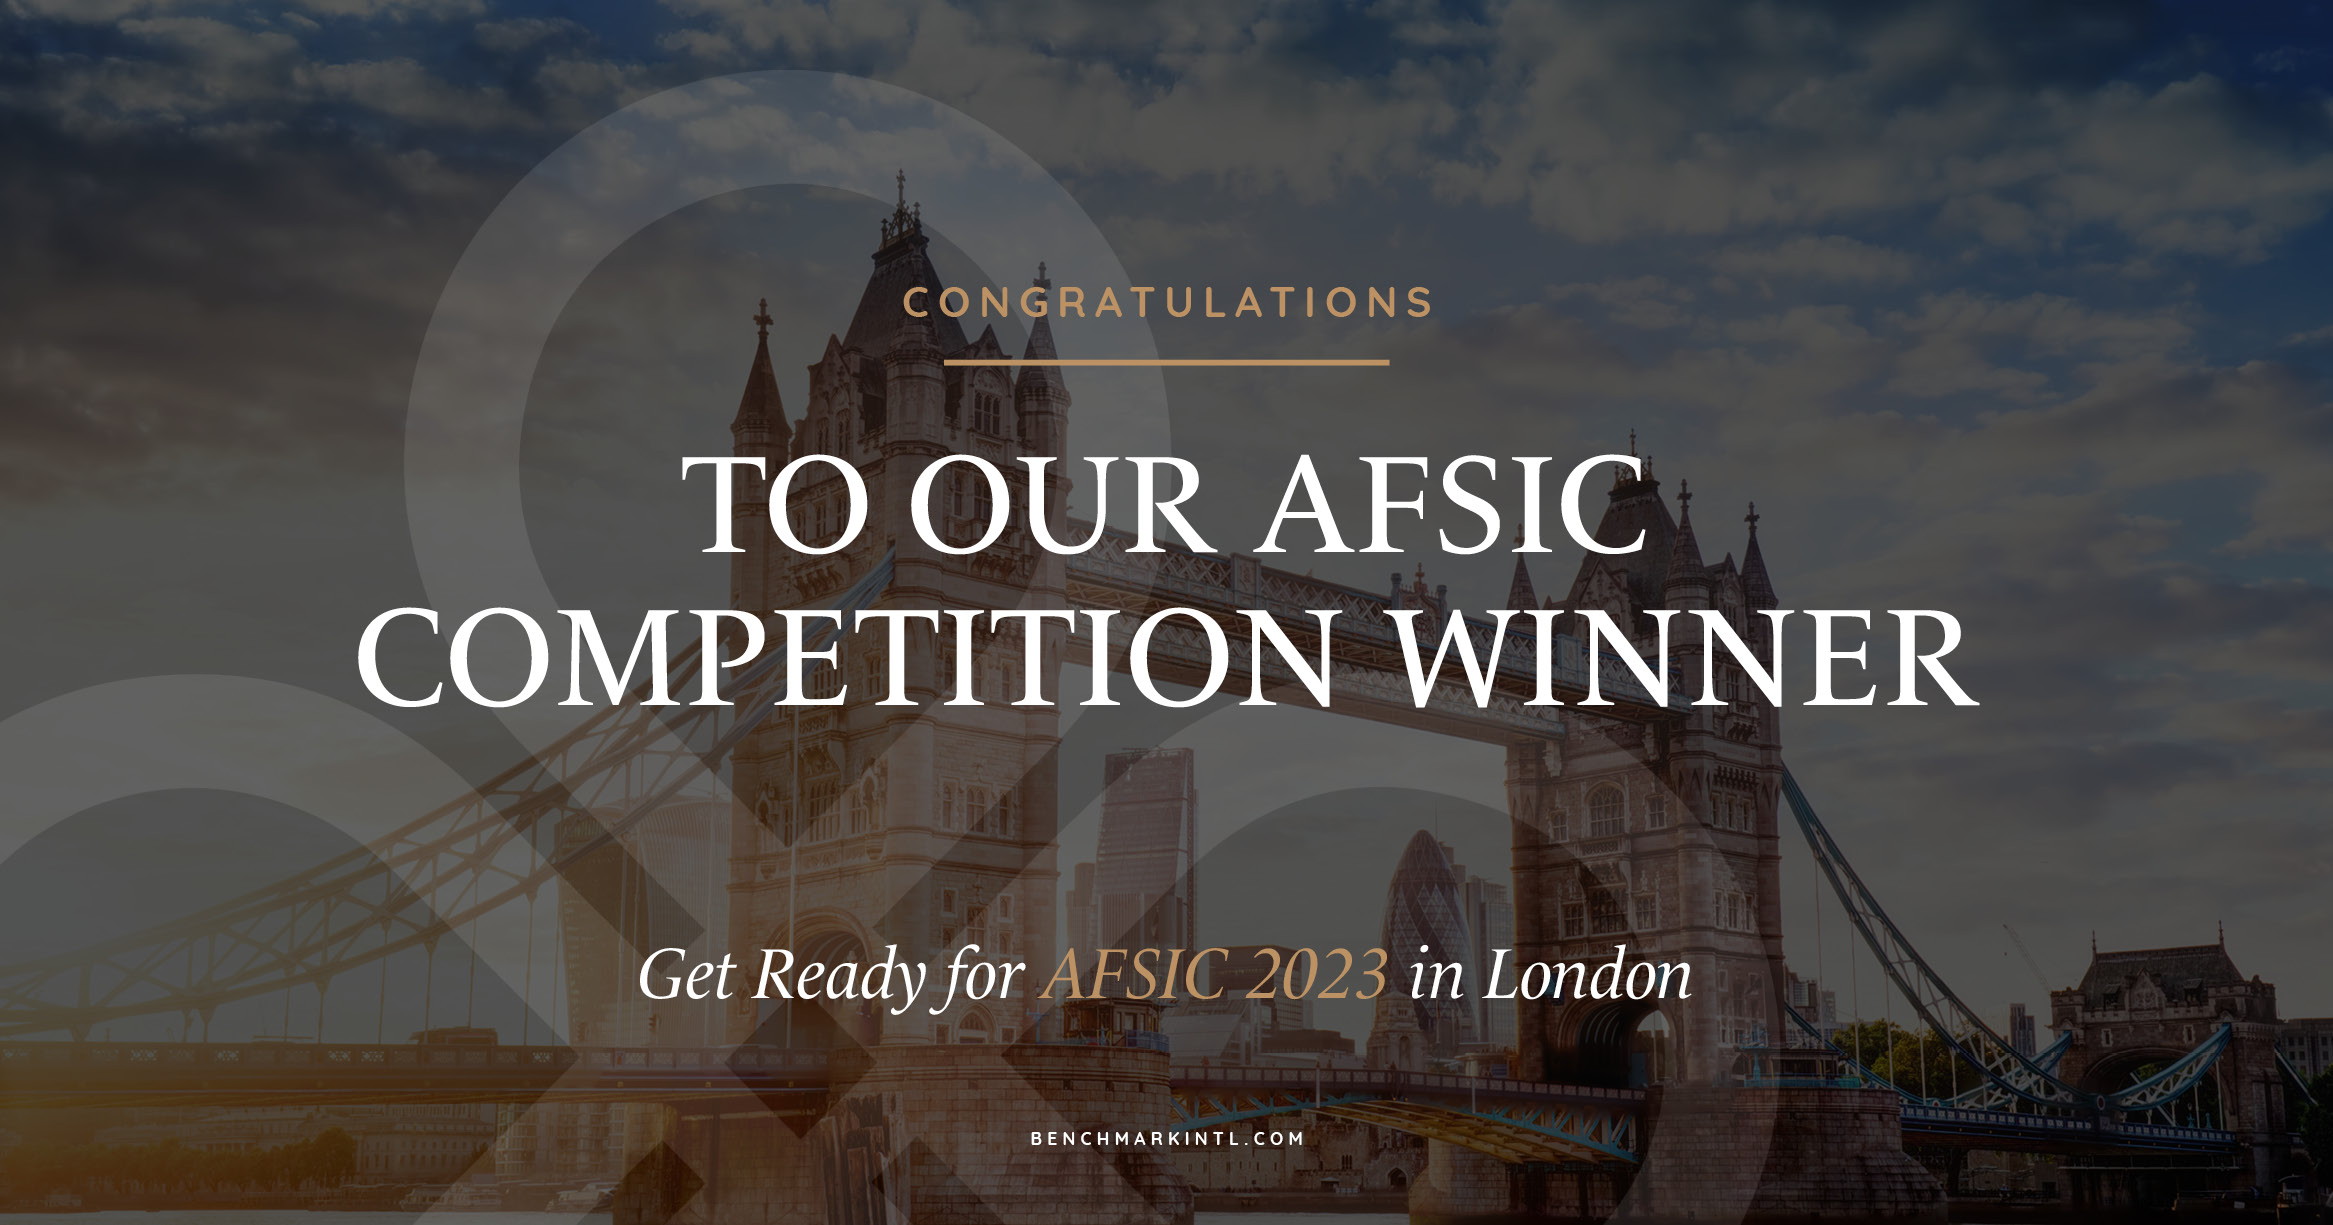 Congratulations to Our AFSIC Competition Winner: Get Ready for AFSIC 2023!